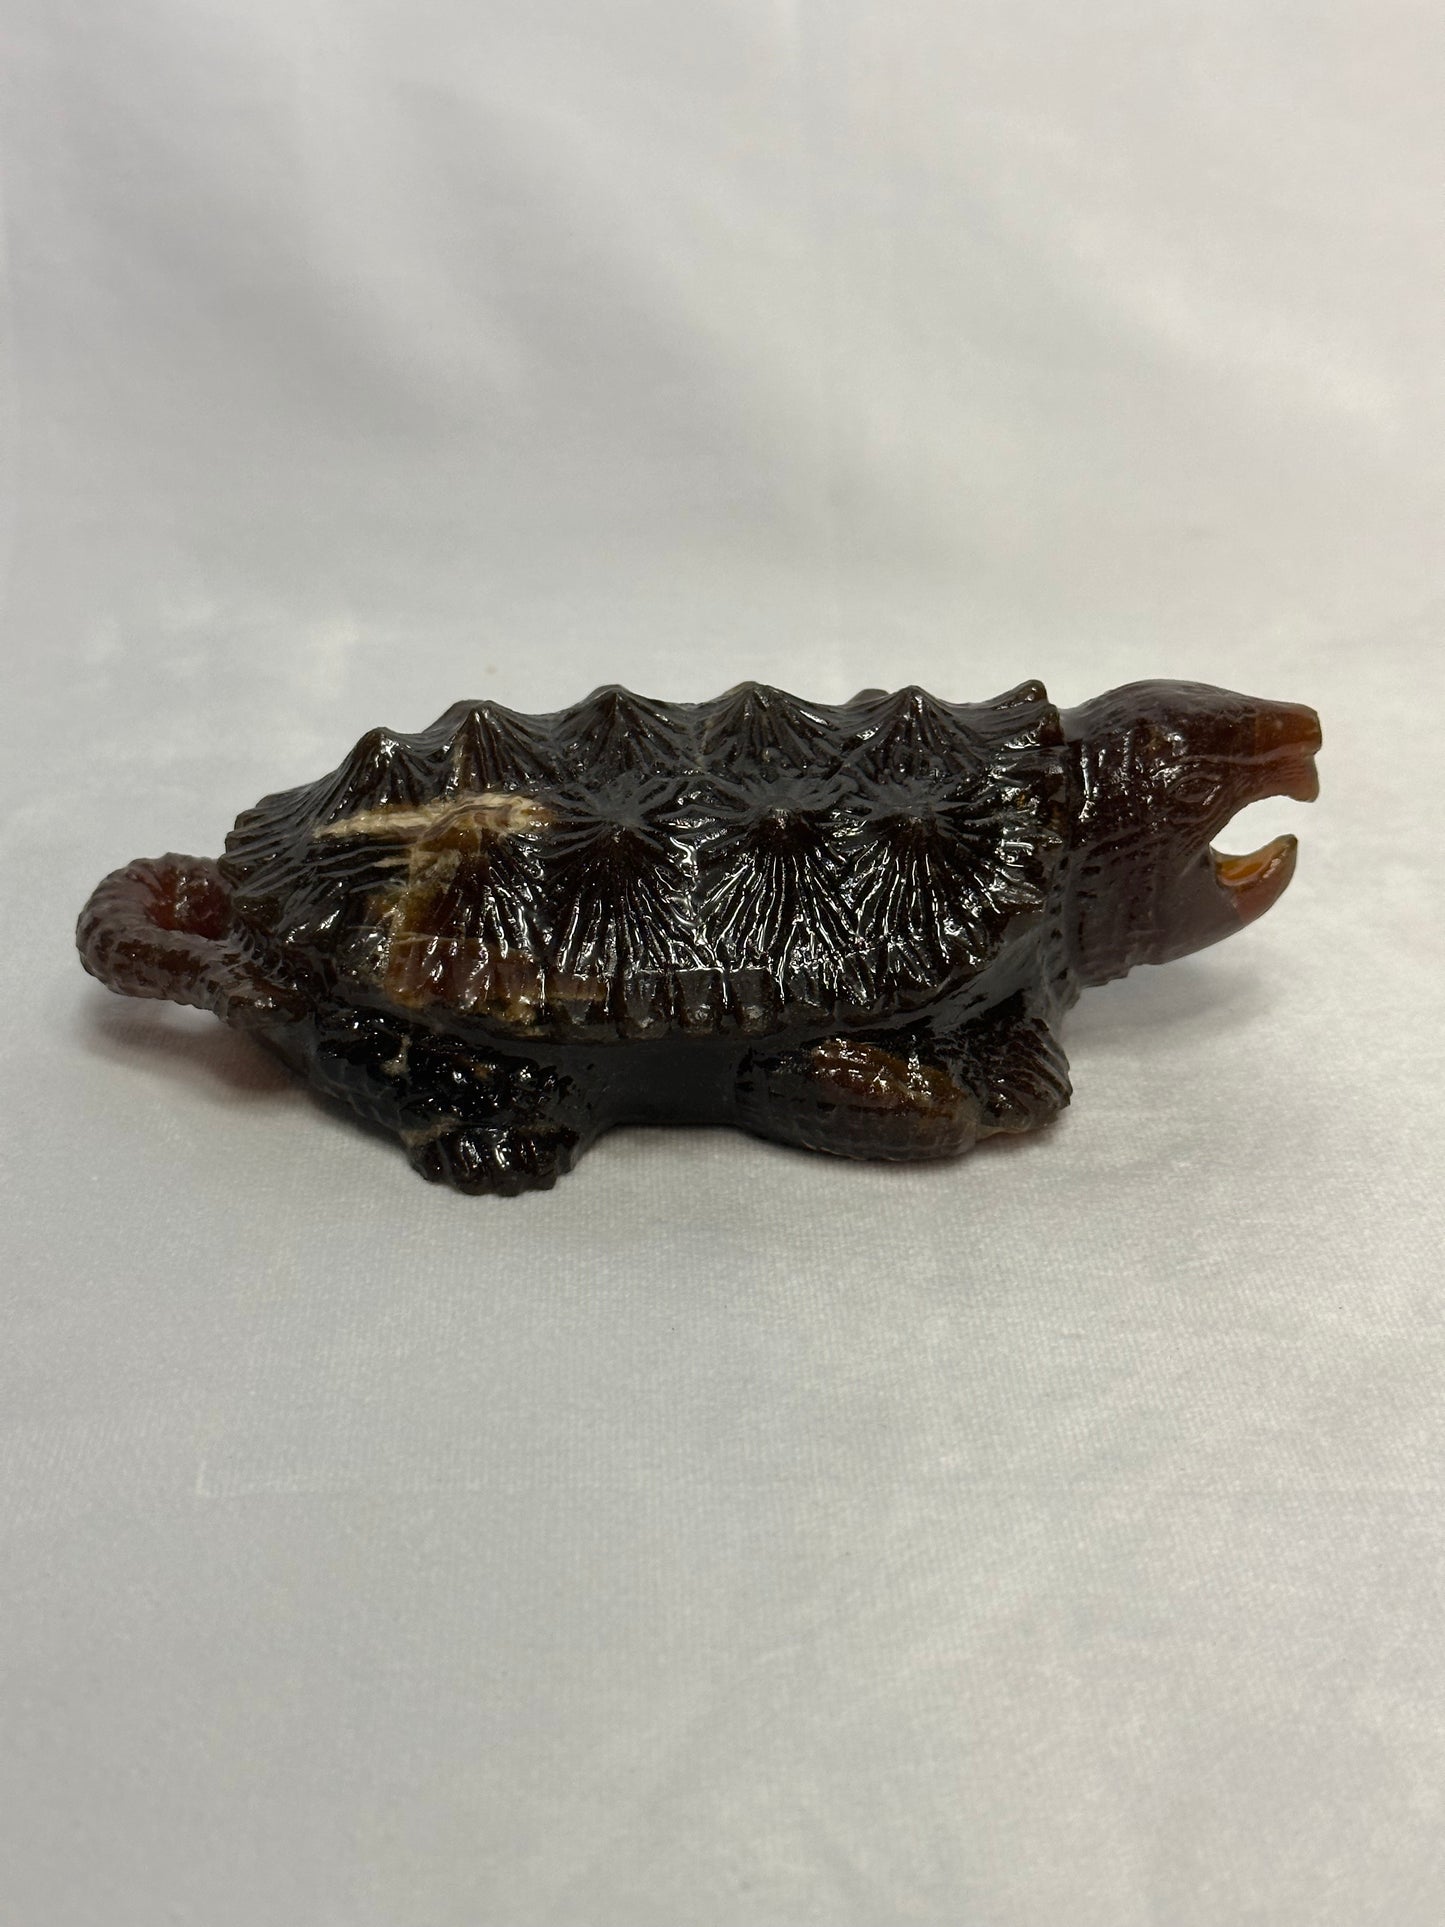 Stunning Amber Snapping Turtle